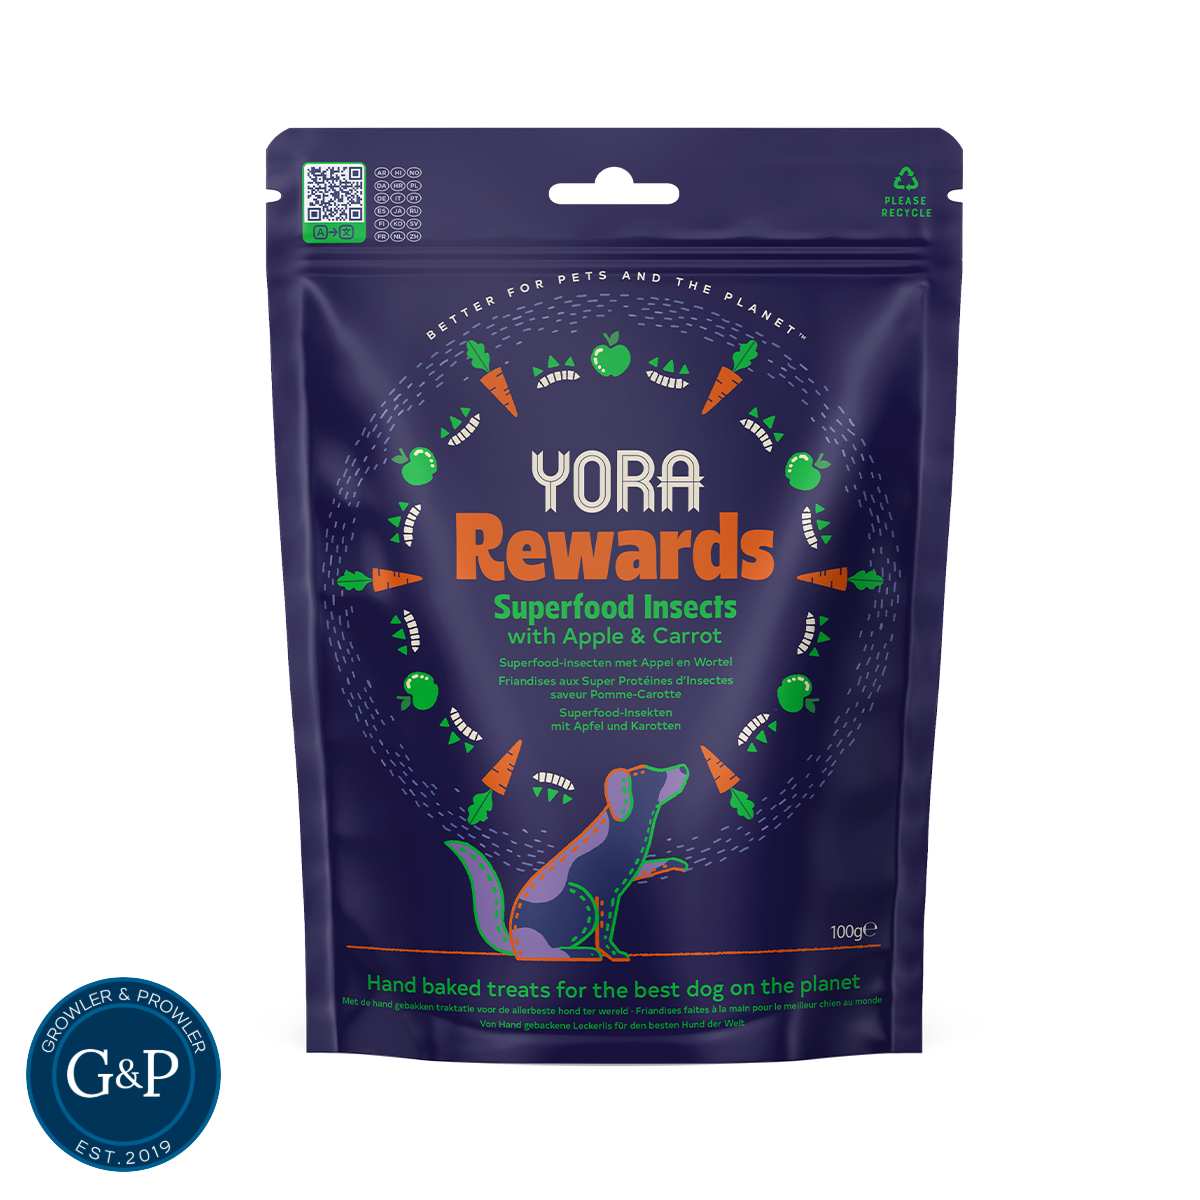 Yora Superfood Insect with Apple & Carrot Dog Treats